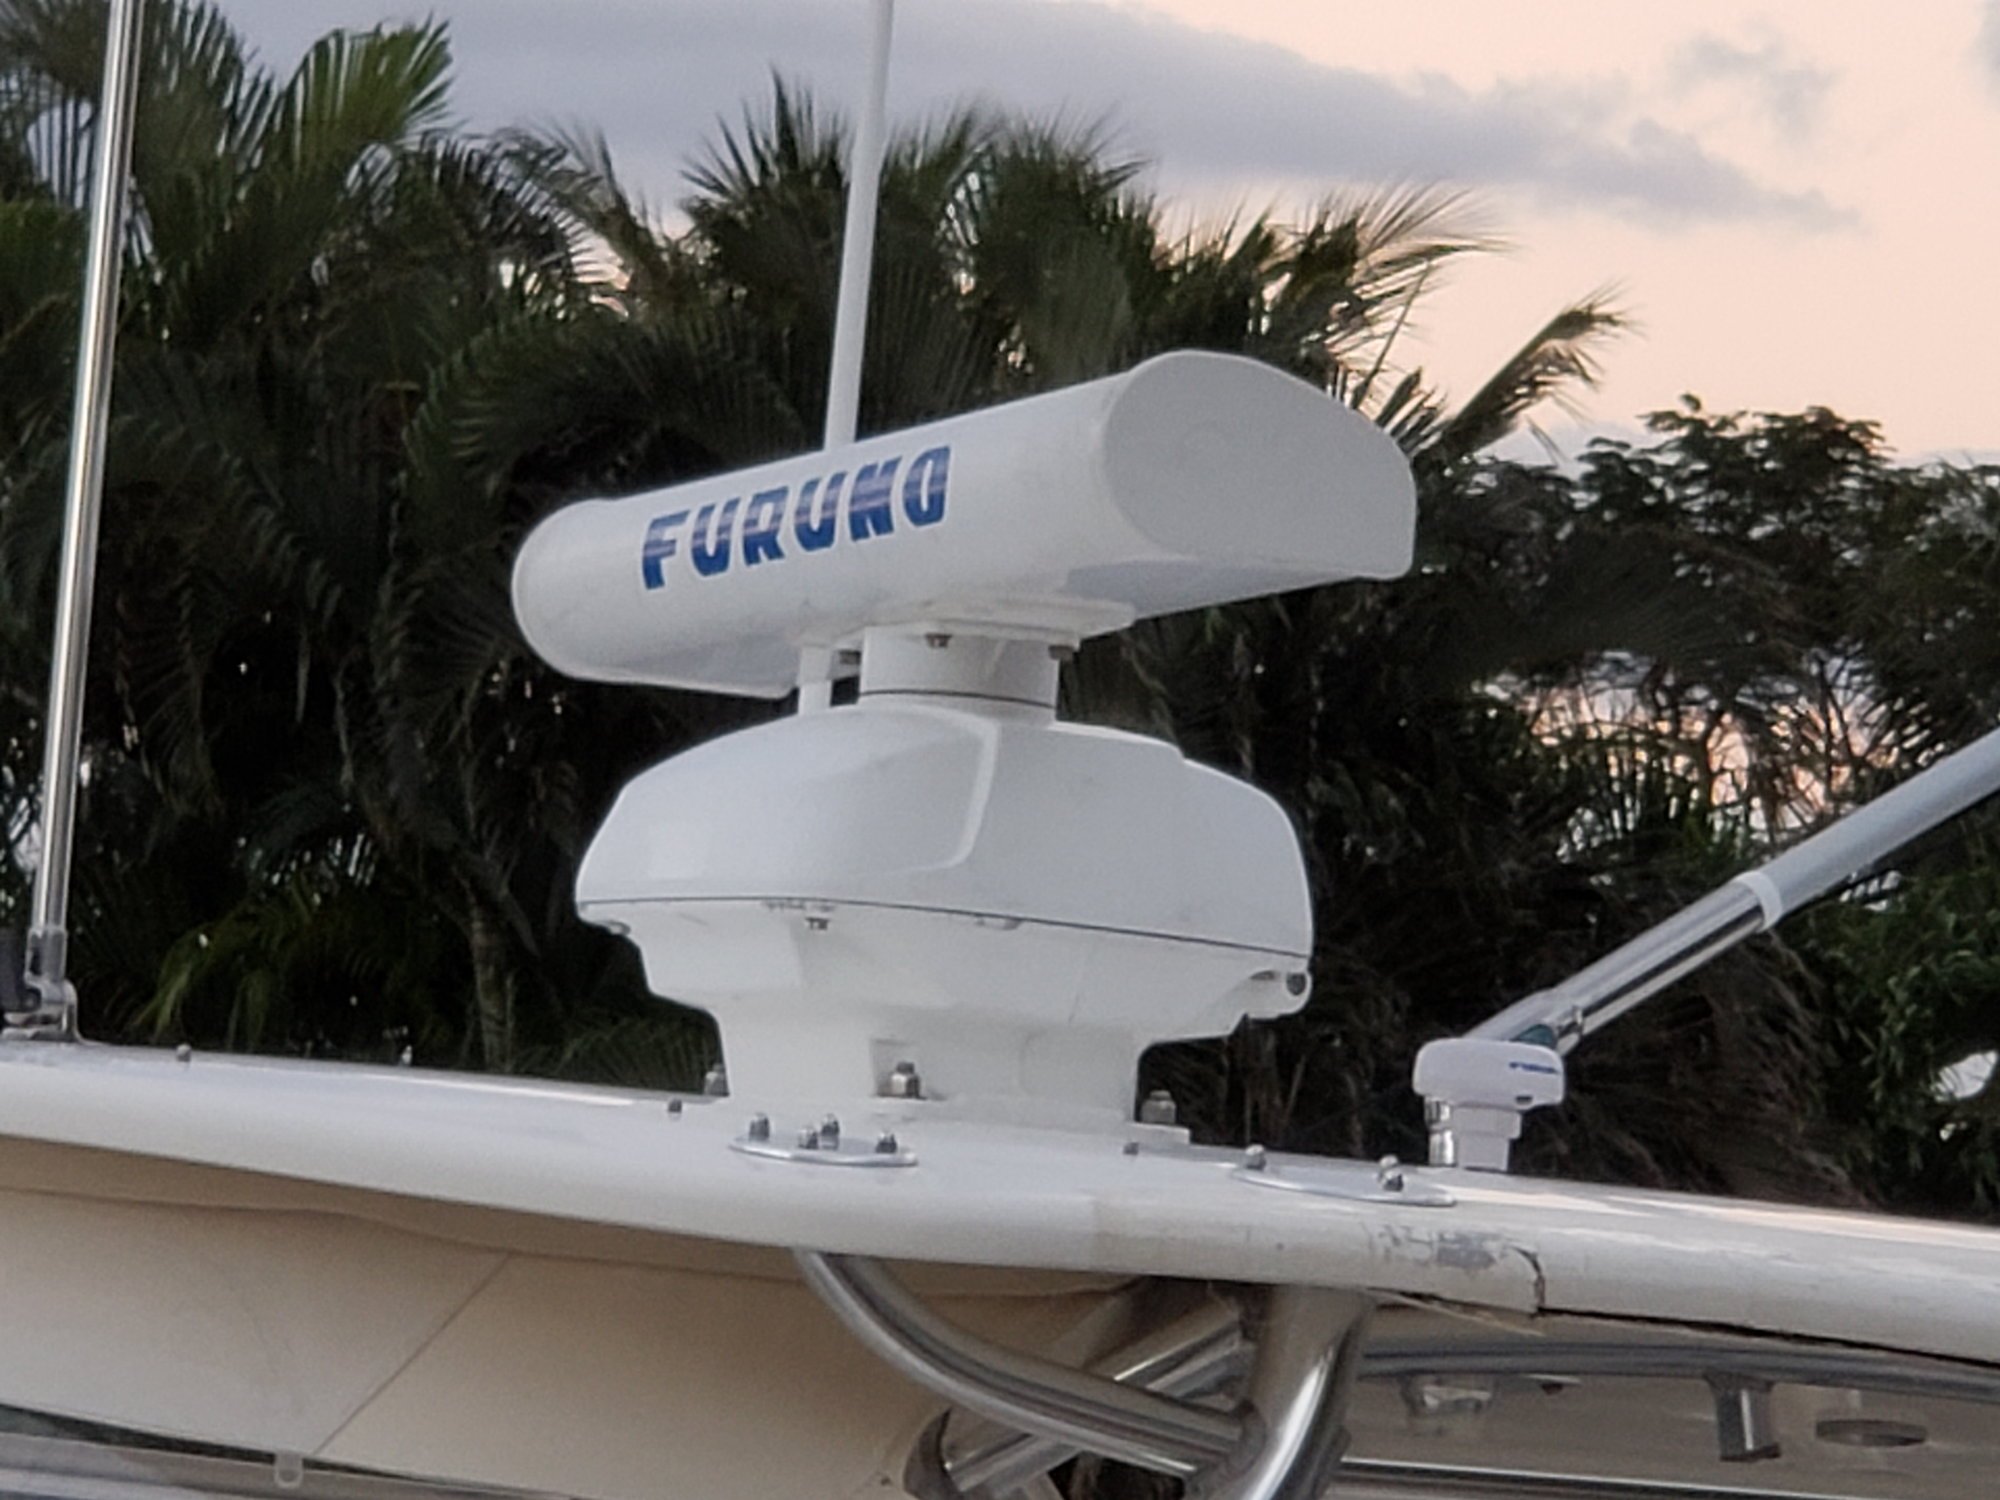 Furuno radar 6kw 4 foot open array - The Hull Truth - Boating and Fishing  Forum